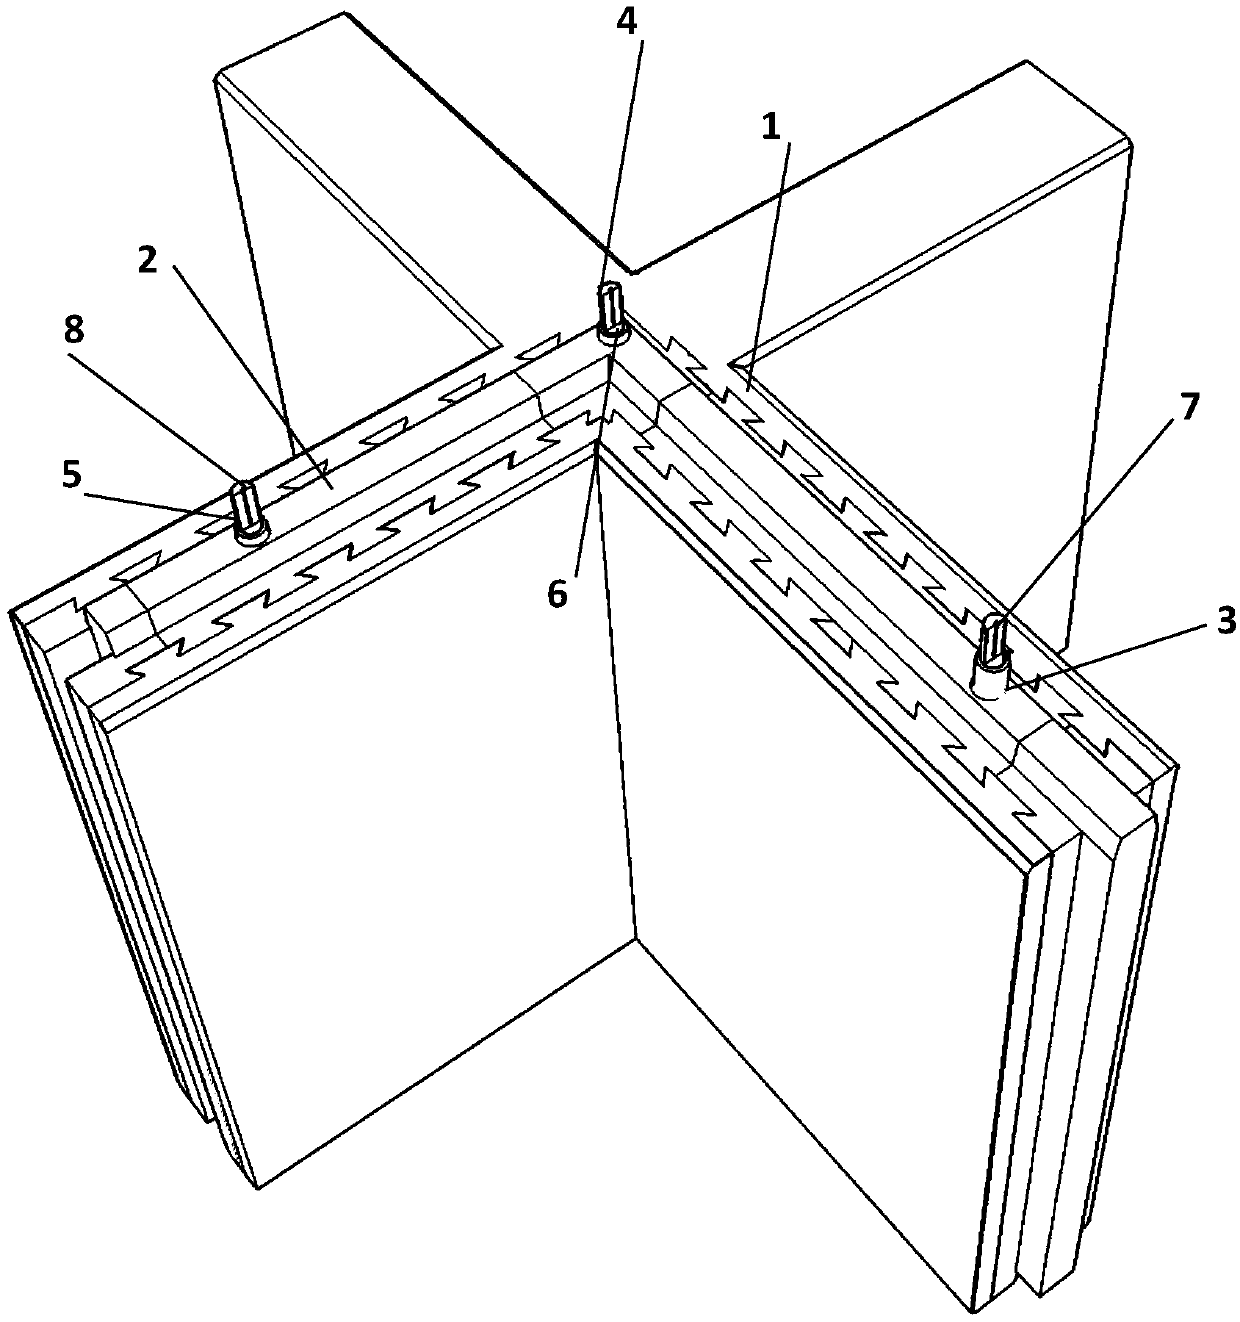 A cross-shaped sandwich thermal insulation composite wall with energy dissipation and shock absorption keys and its method